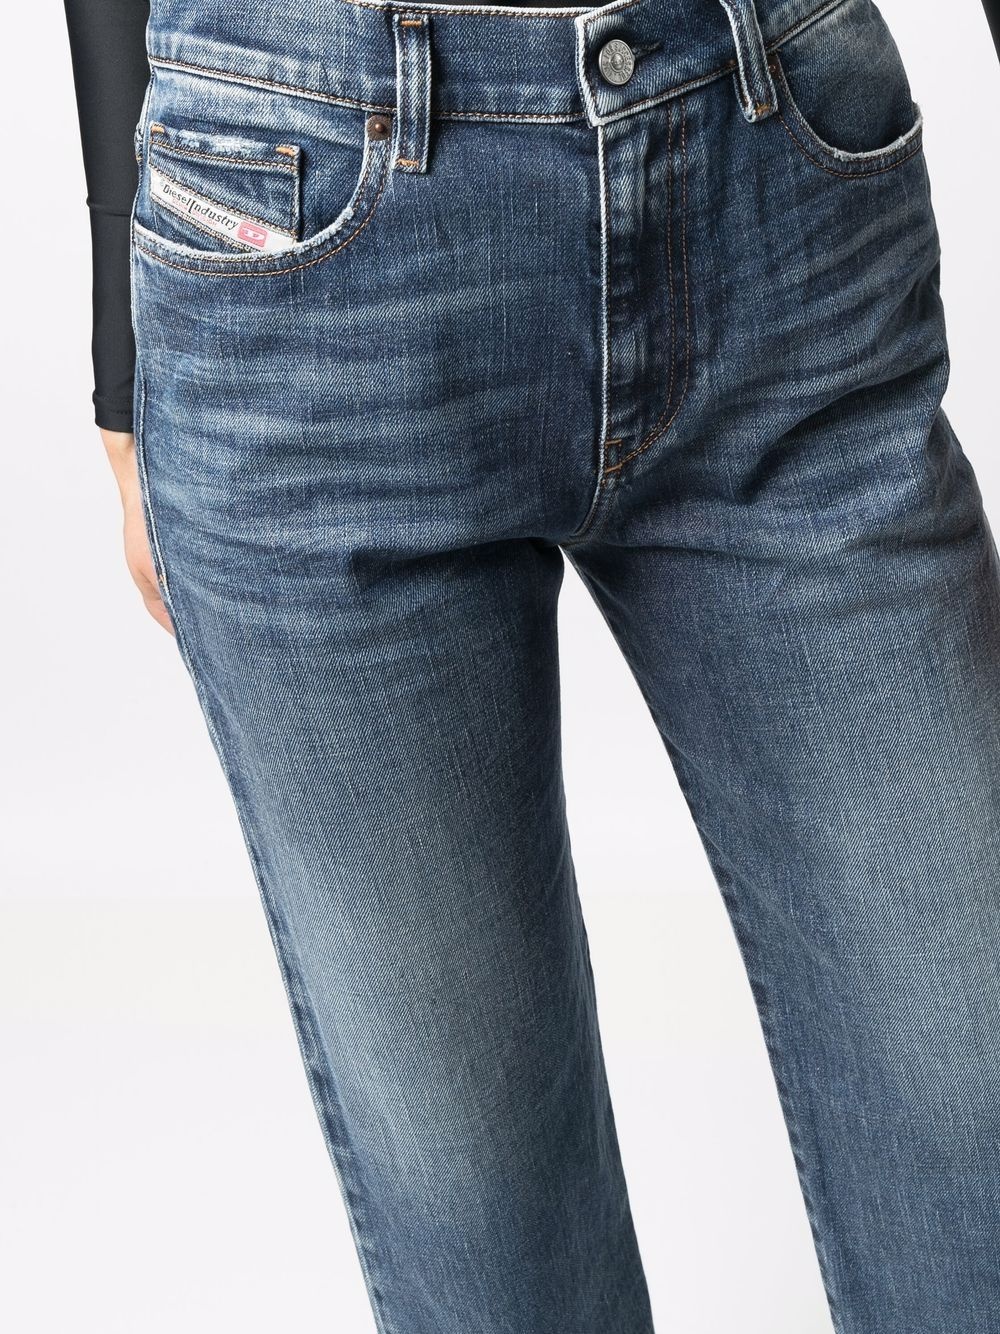 2016 D-AIR cropped jeans - 5